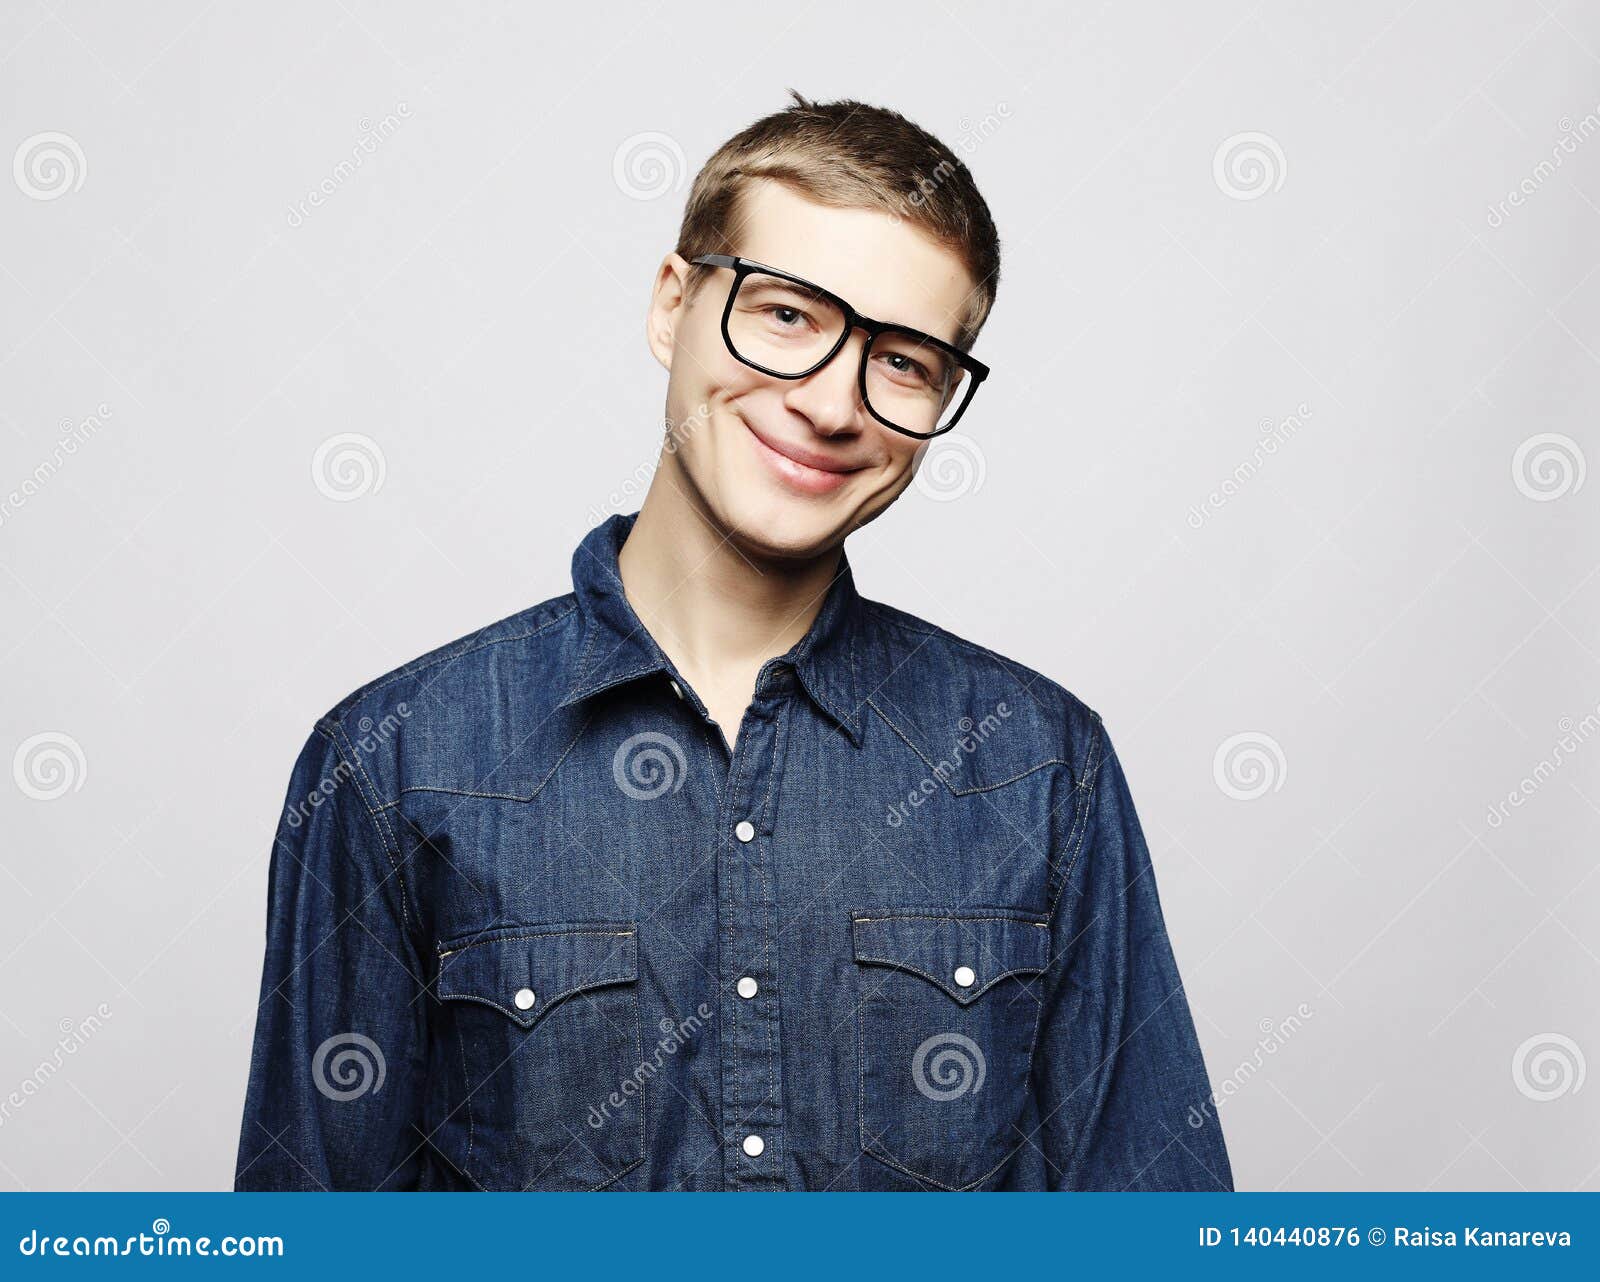 Portrait Of A Smart Young Man Wearing Eyeglasses Standing Against White ...